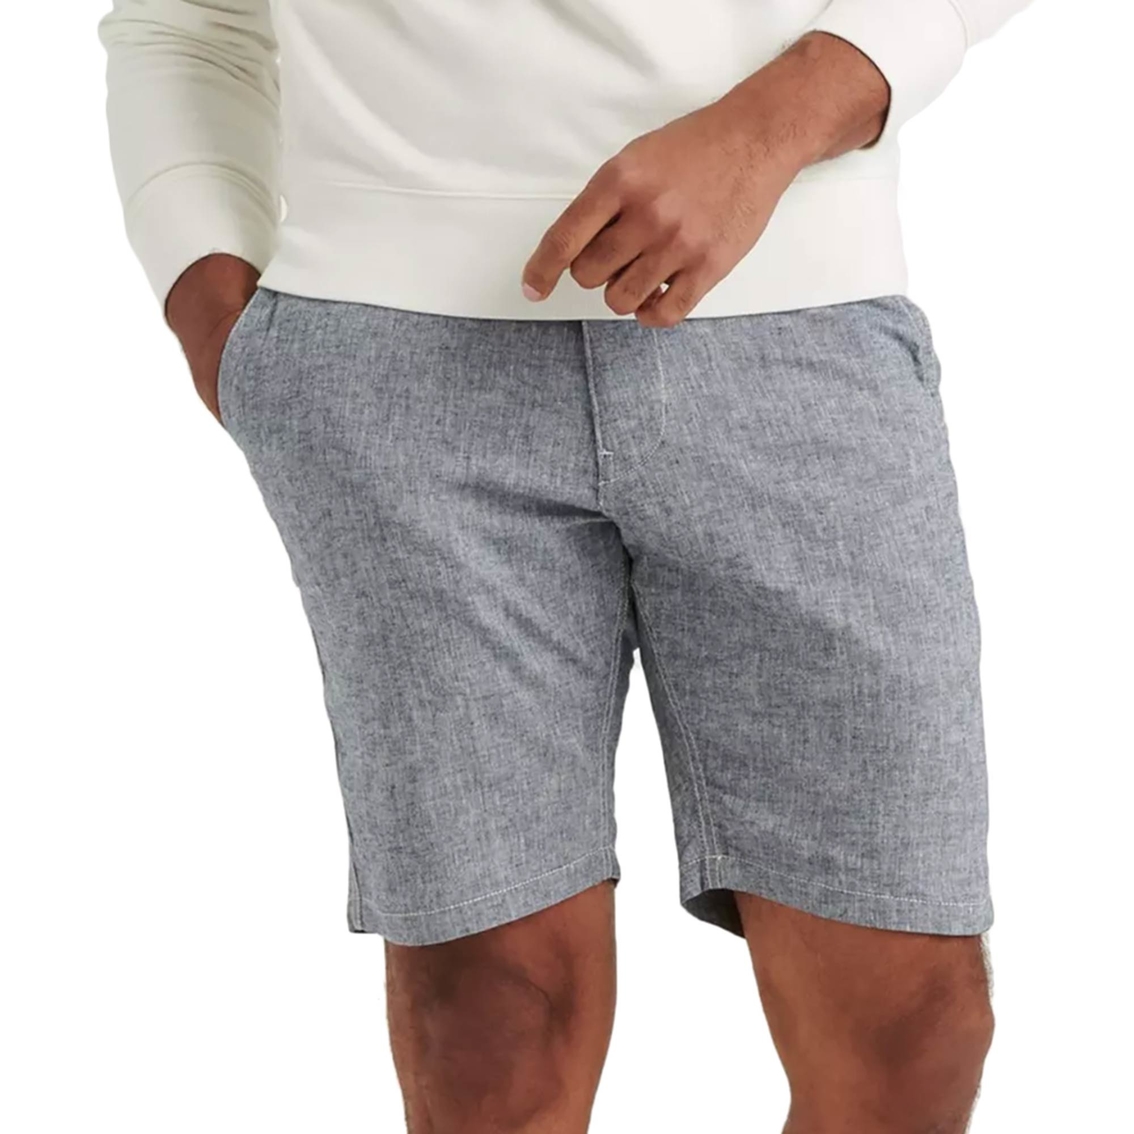 Lucky Brand Linen 10 In. Shorts, Shorts, Clothing & Accessories